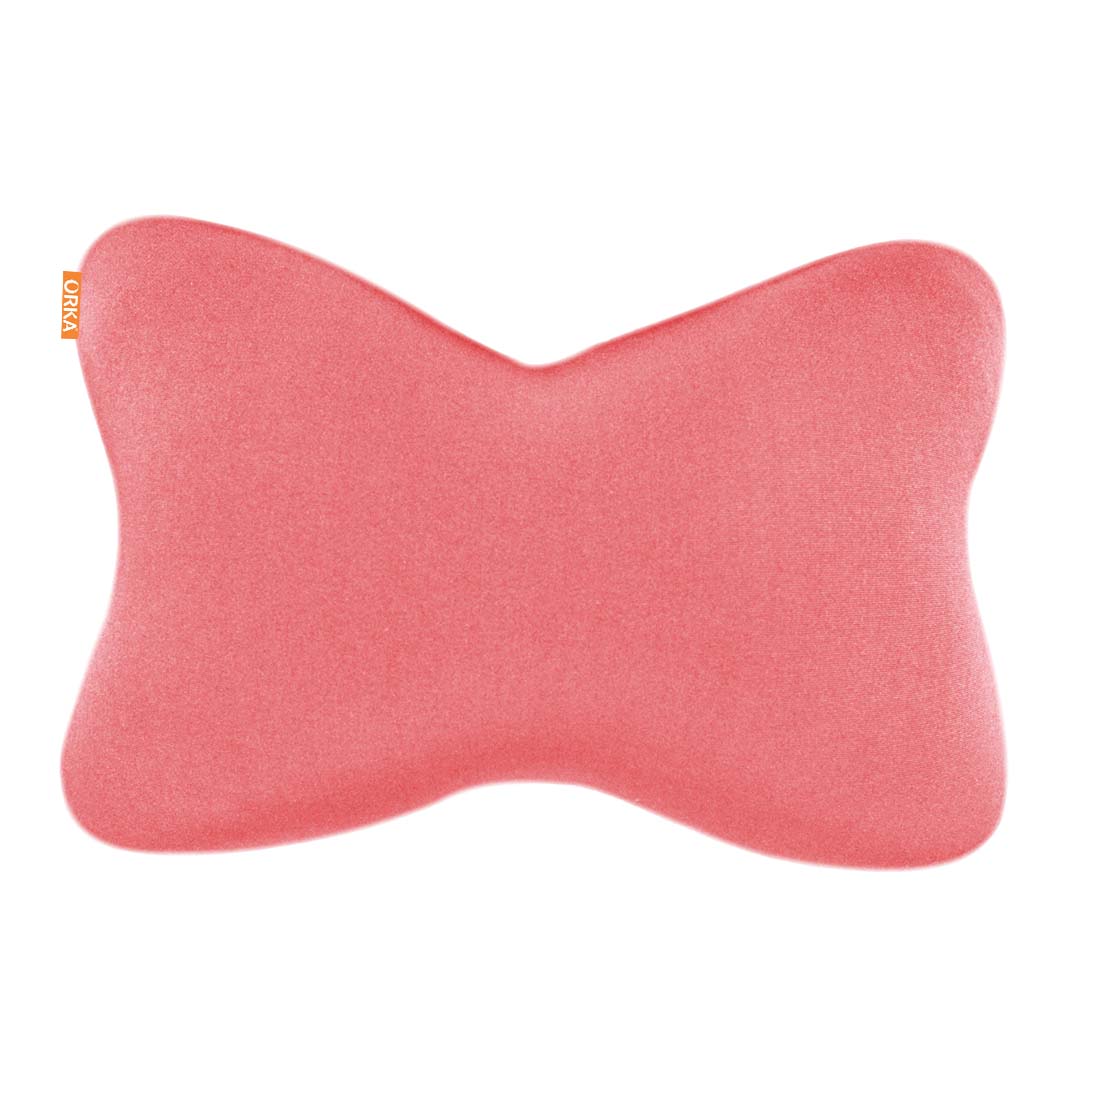 ORKA Classic Car Neckrest Pillow Filled With Microbeads [Pack Of 2] - Pink  